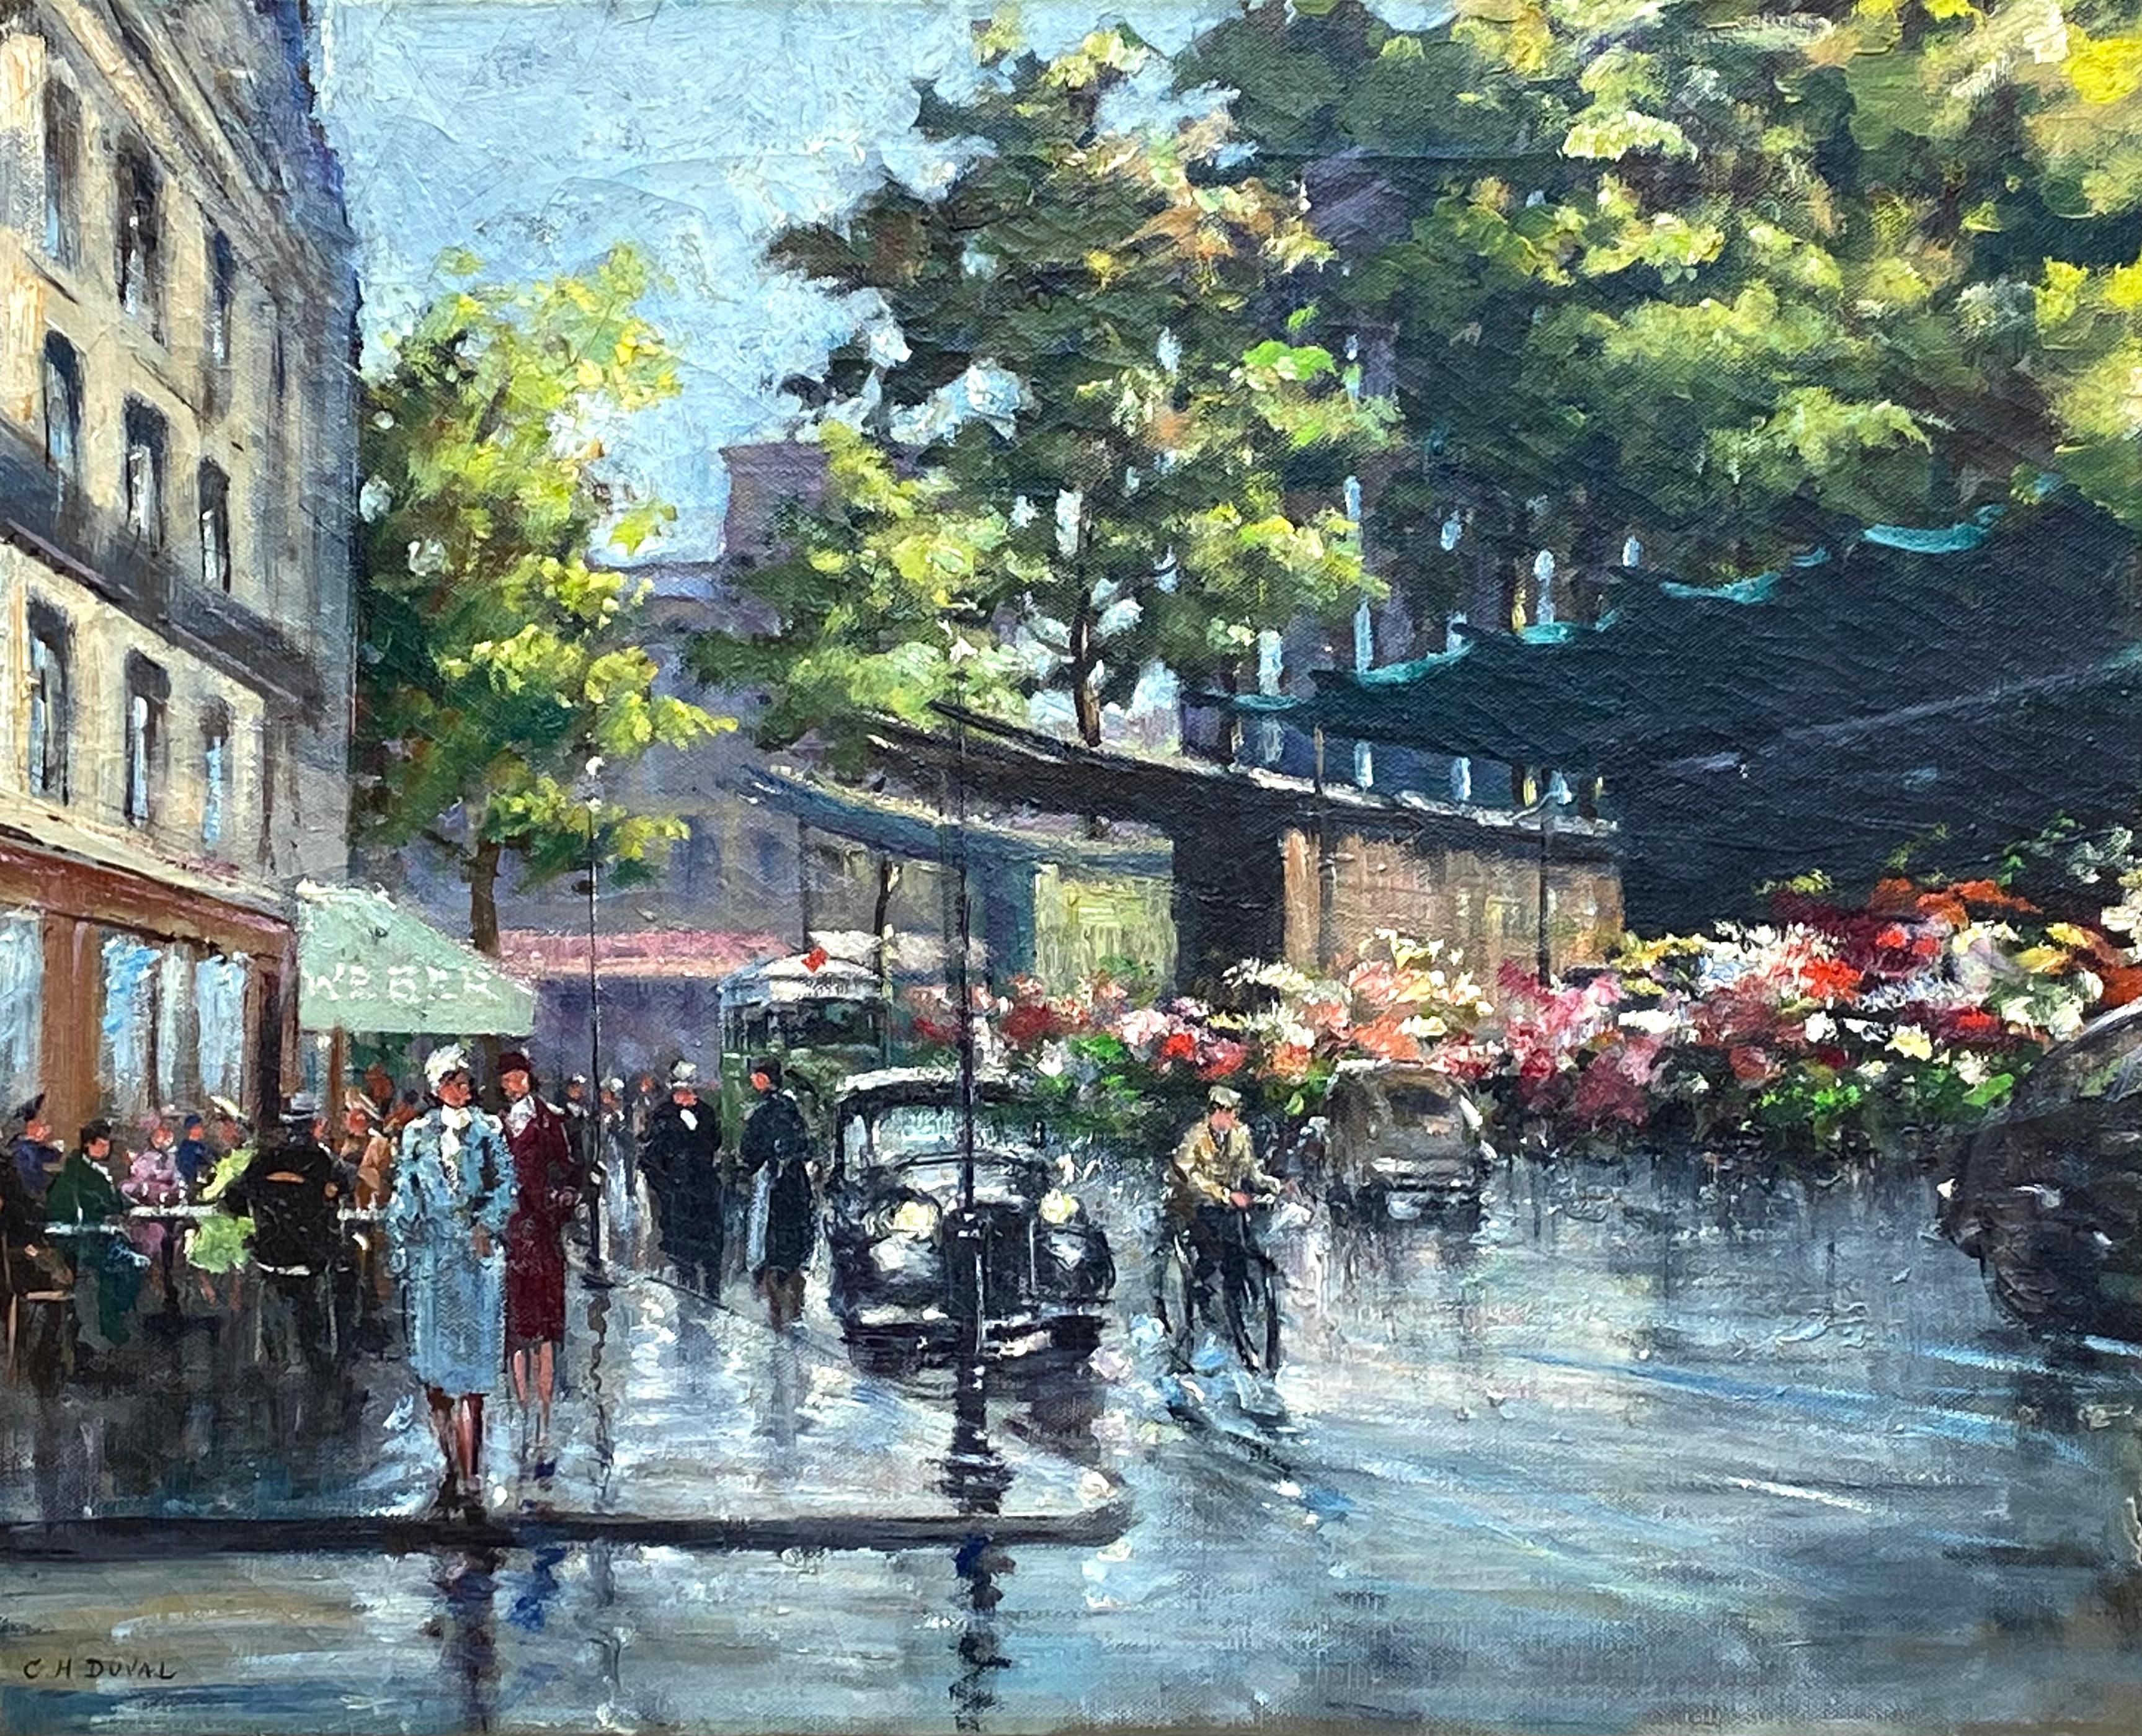 Original post impressionist oil on canvas painting of the landmark Cafe Weber in Paris by C.H. Duval.  Circa 1950. Signed by the artist lower left. Condition is excellent. Titled and signed again verso on top left wood stretcher. The painting is